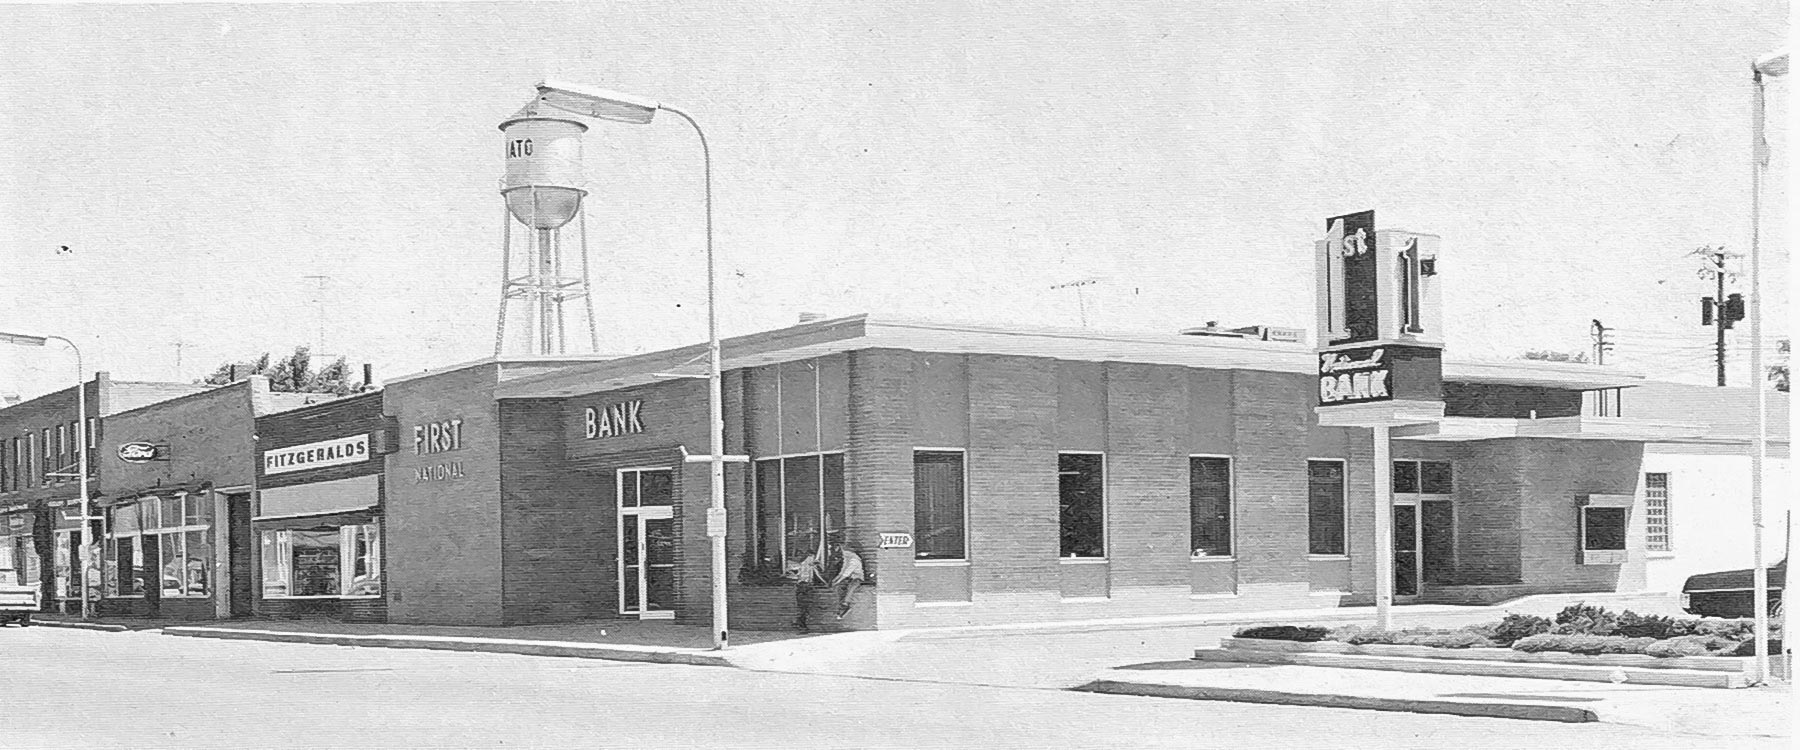 Picture of First National Bank on Broadway Avenue, 1970.